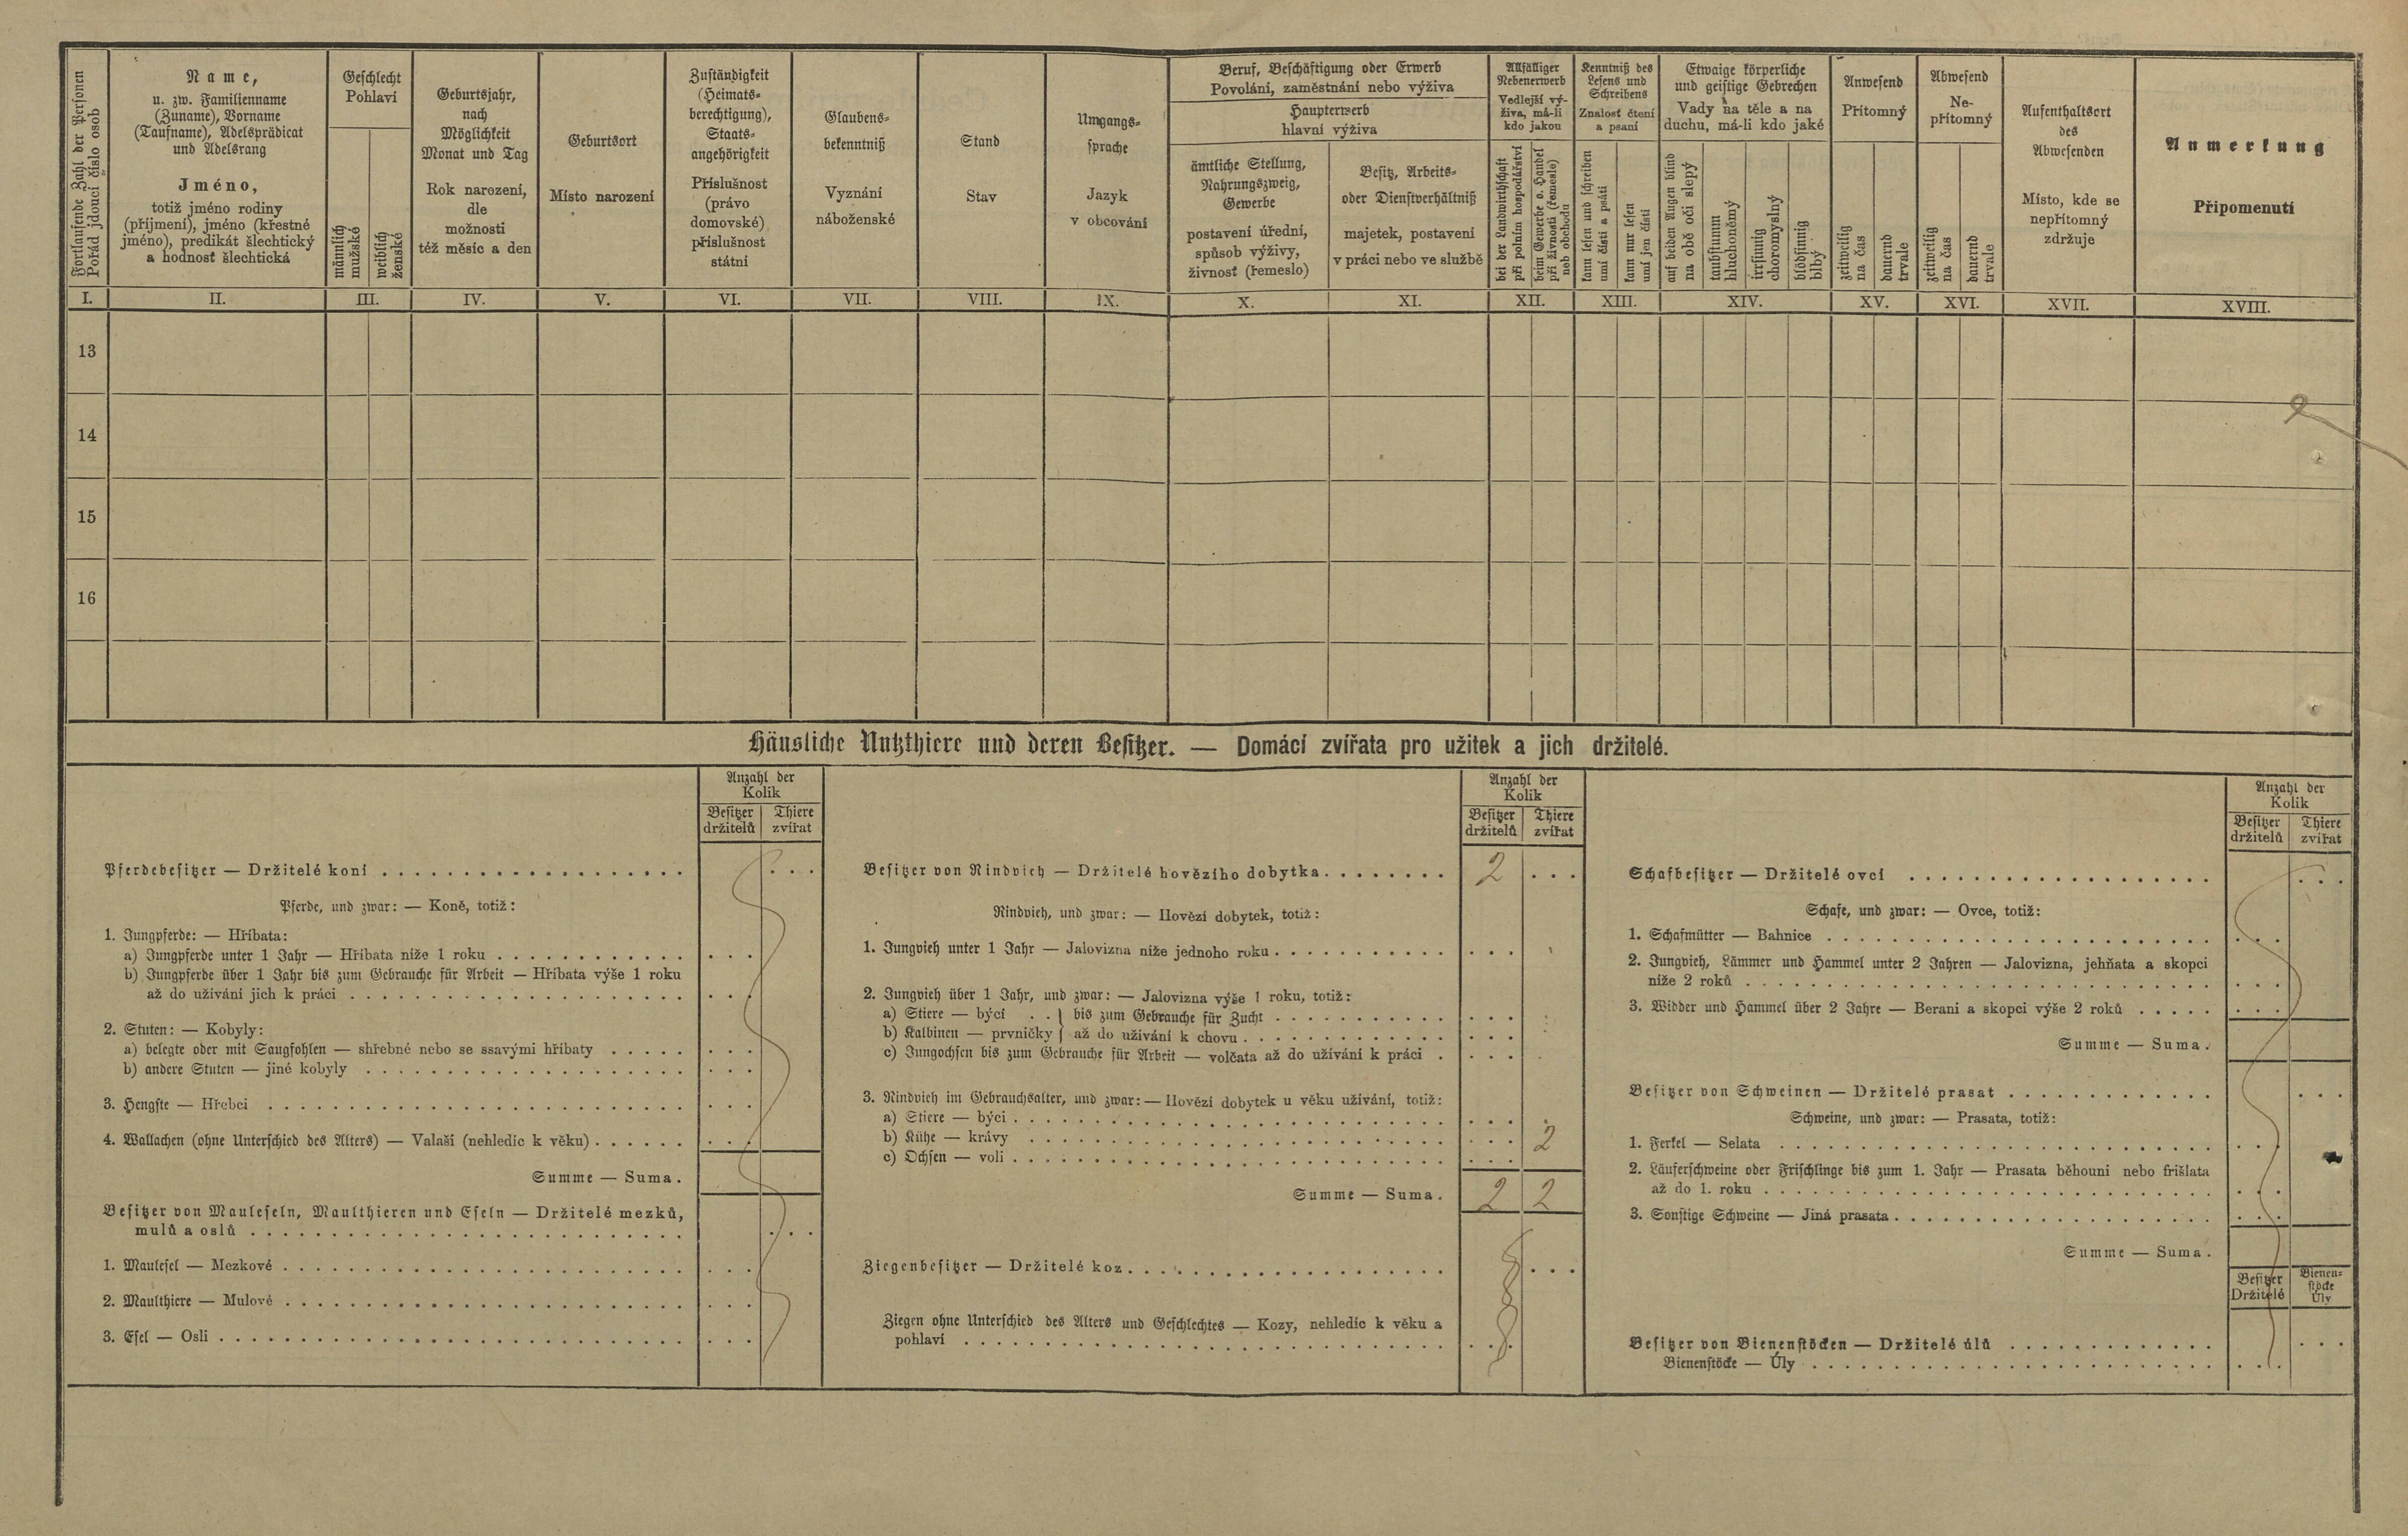 3. soap-pj_00302_census-1880-srby-cp010_0030